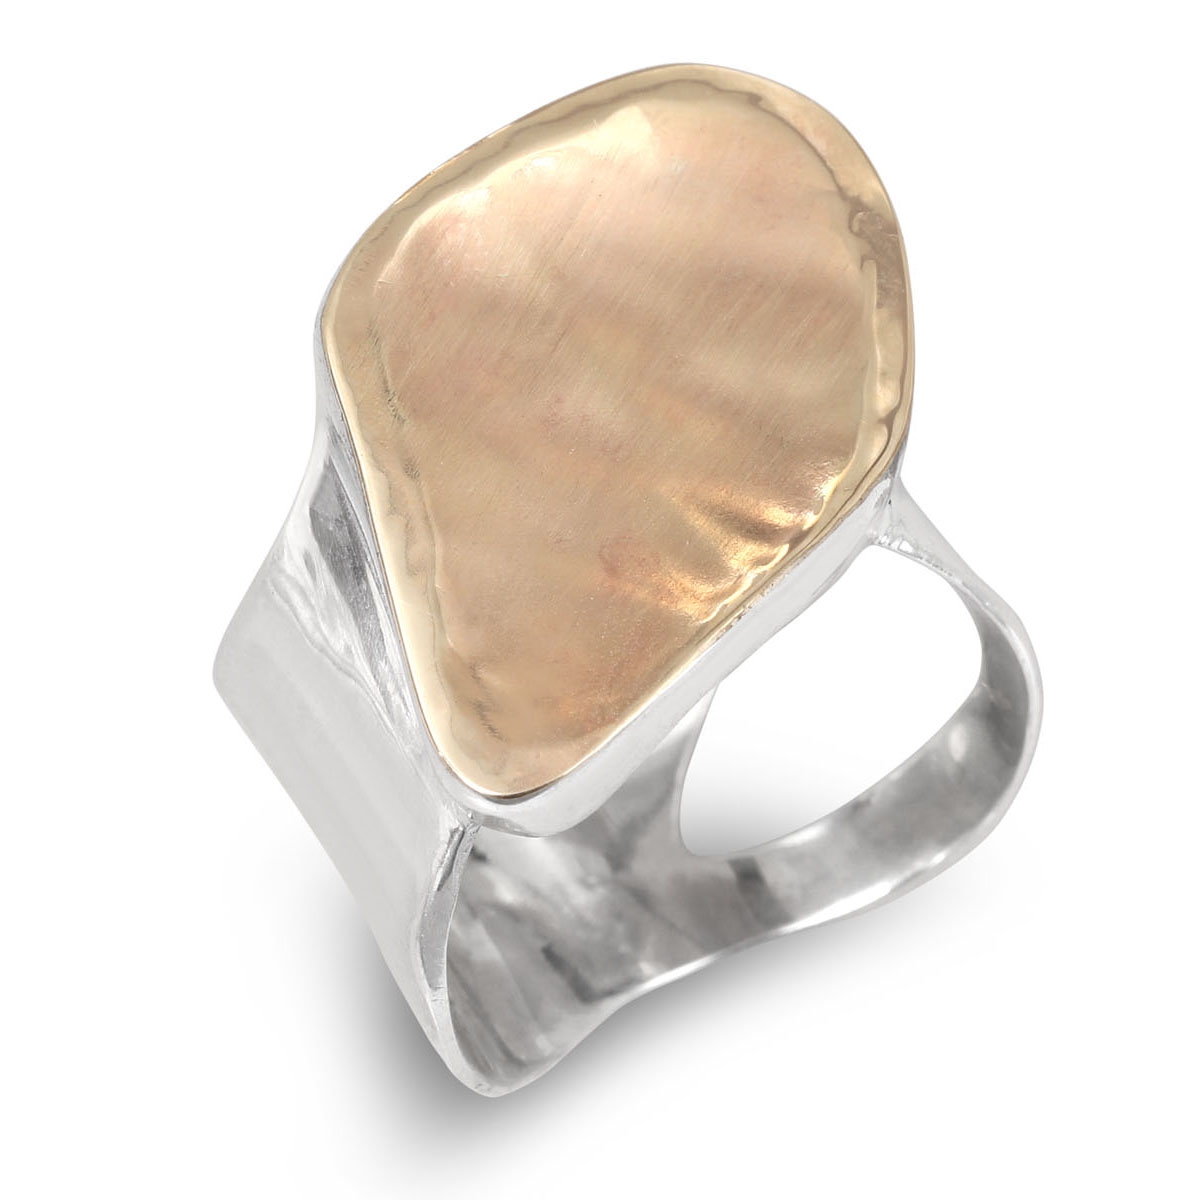 Moriah Jewelry Matte Chunky Gold and Sterling Silver Ring  - 1